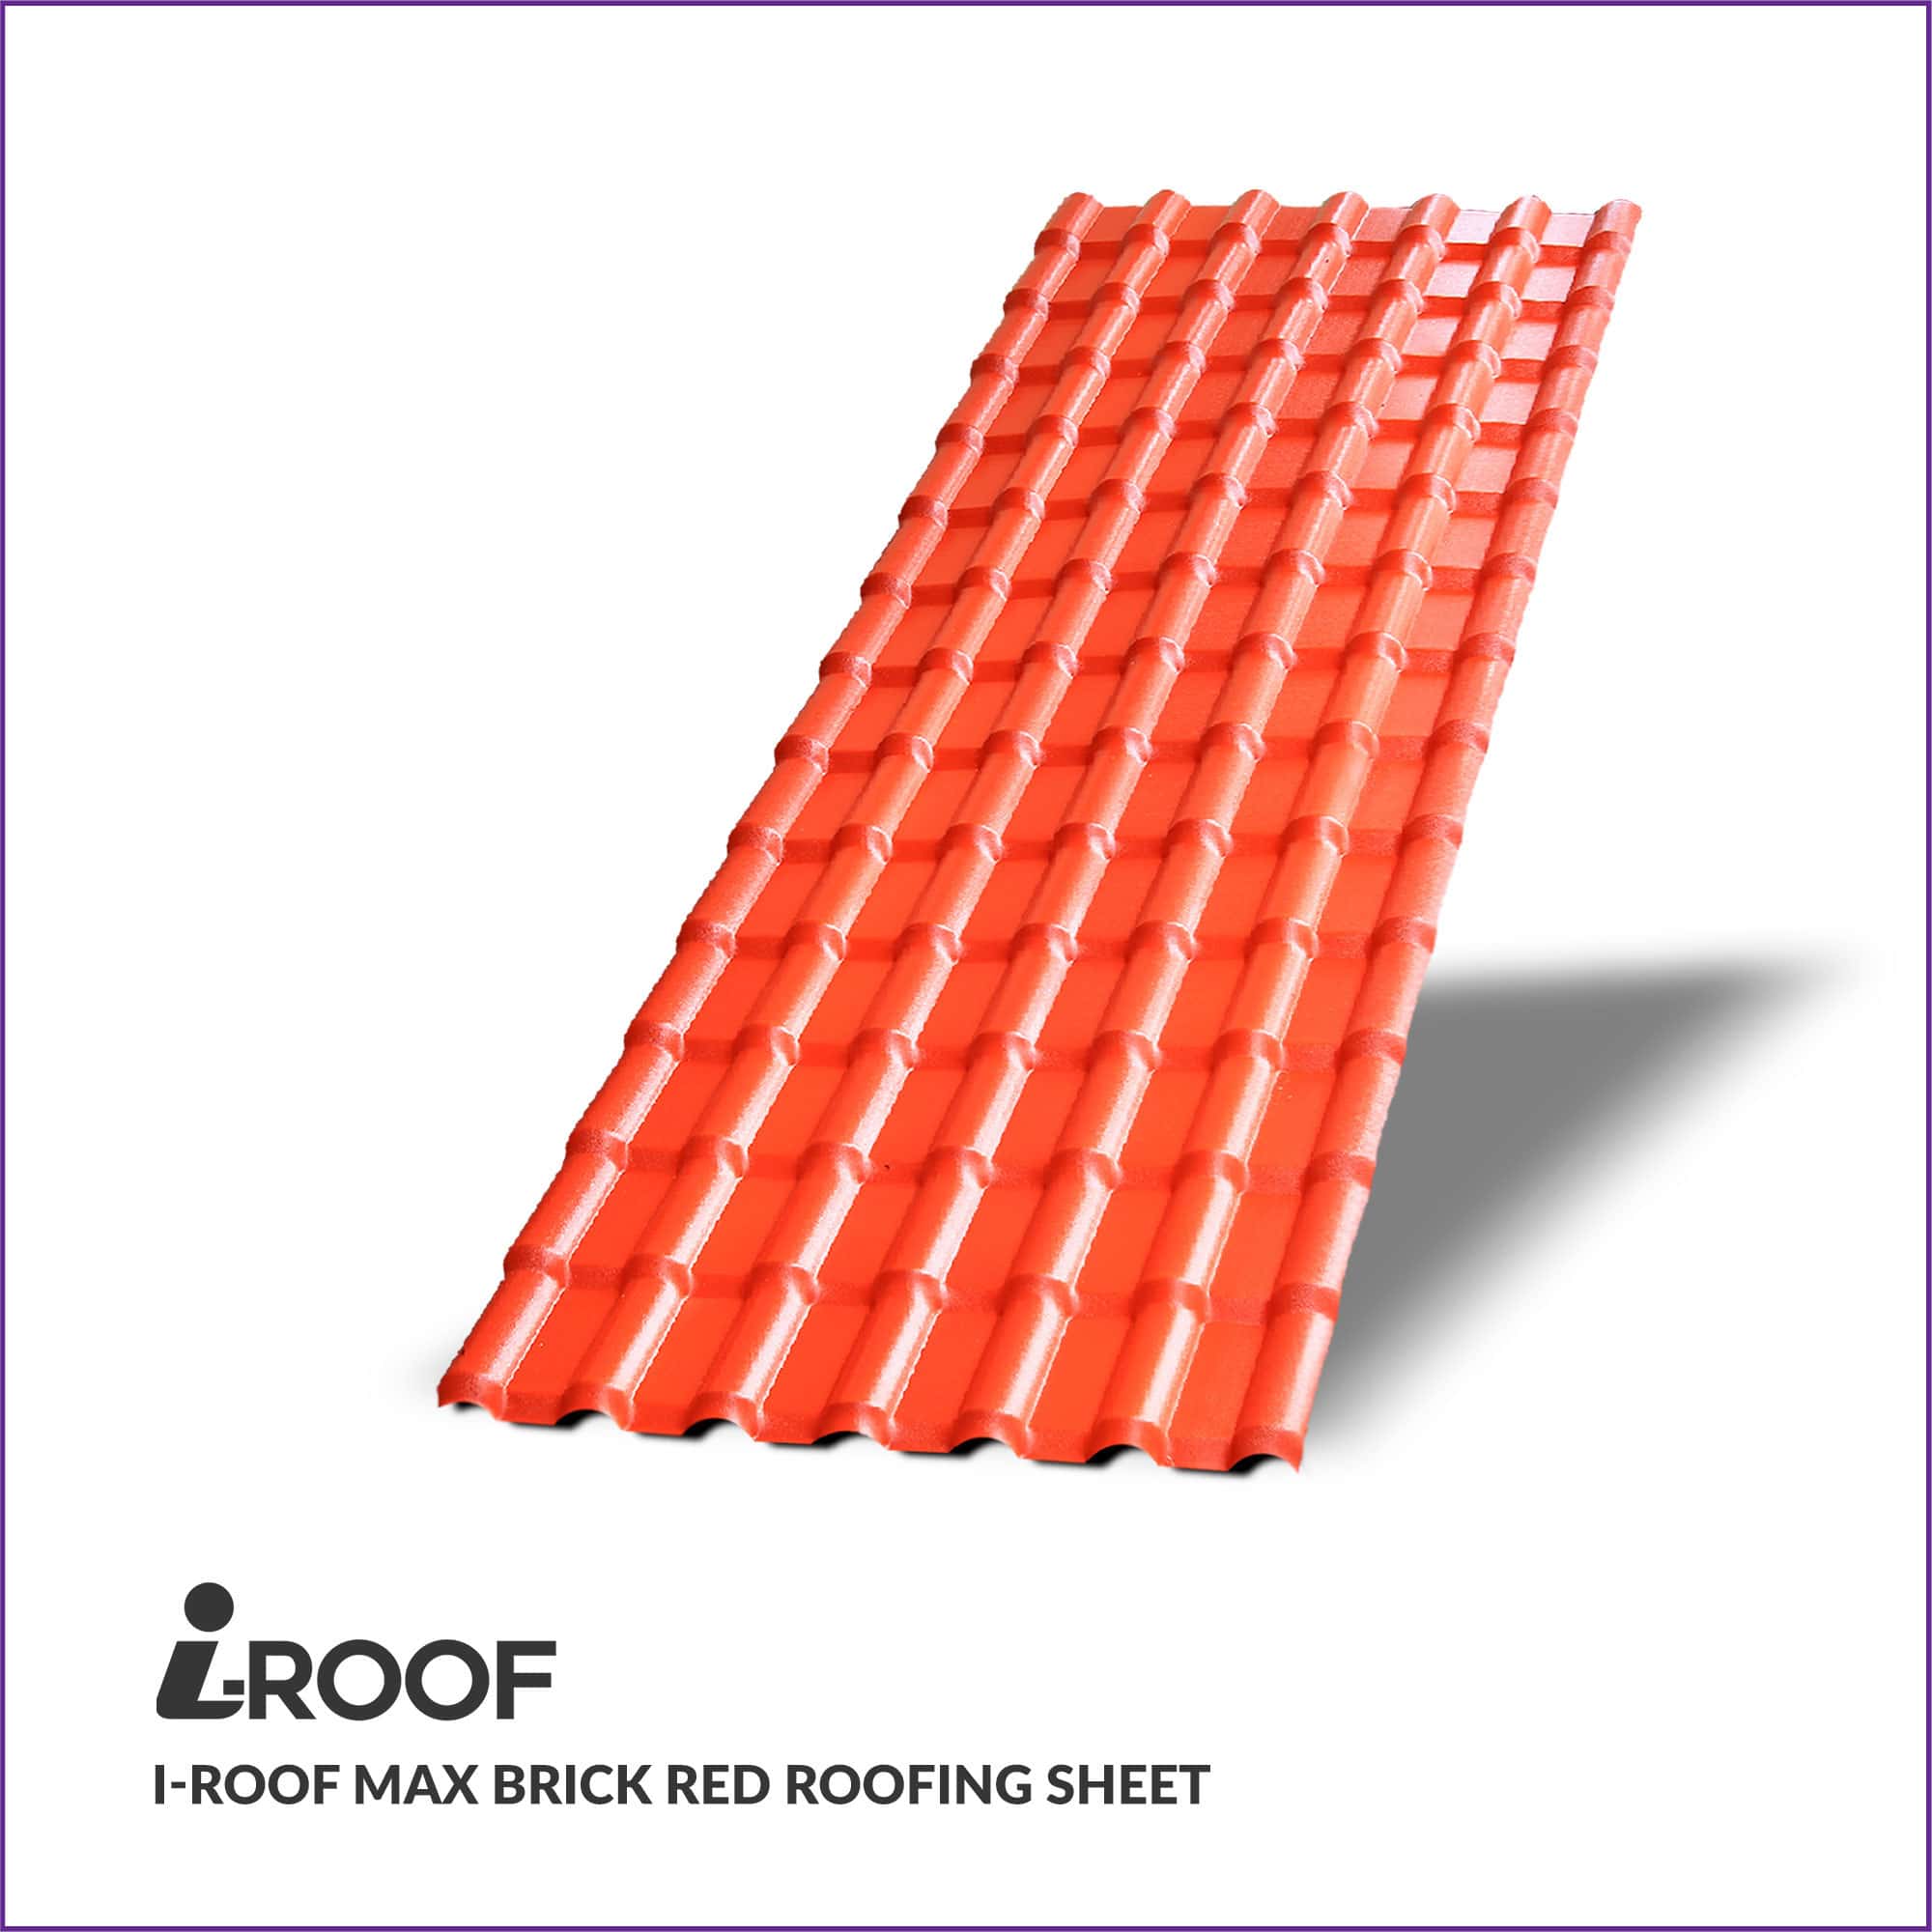 iRoof Elevating Your Shelter Experience